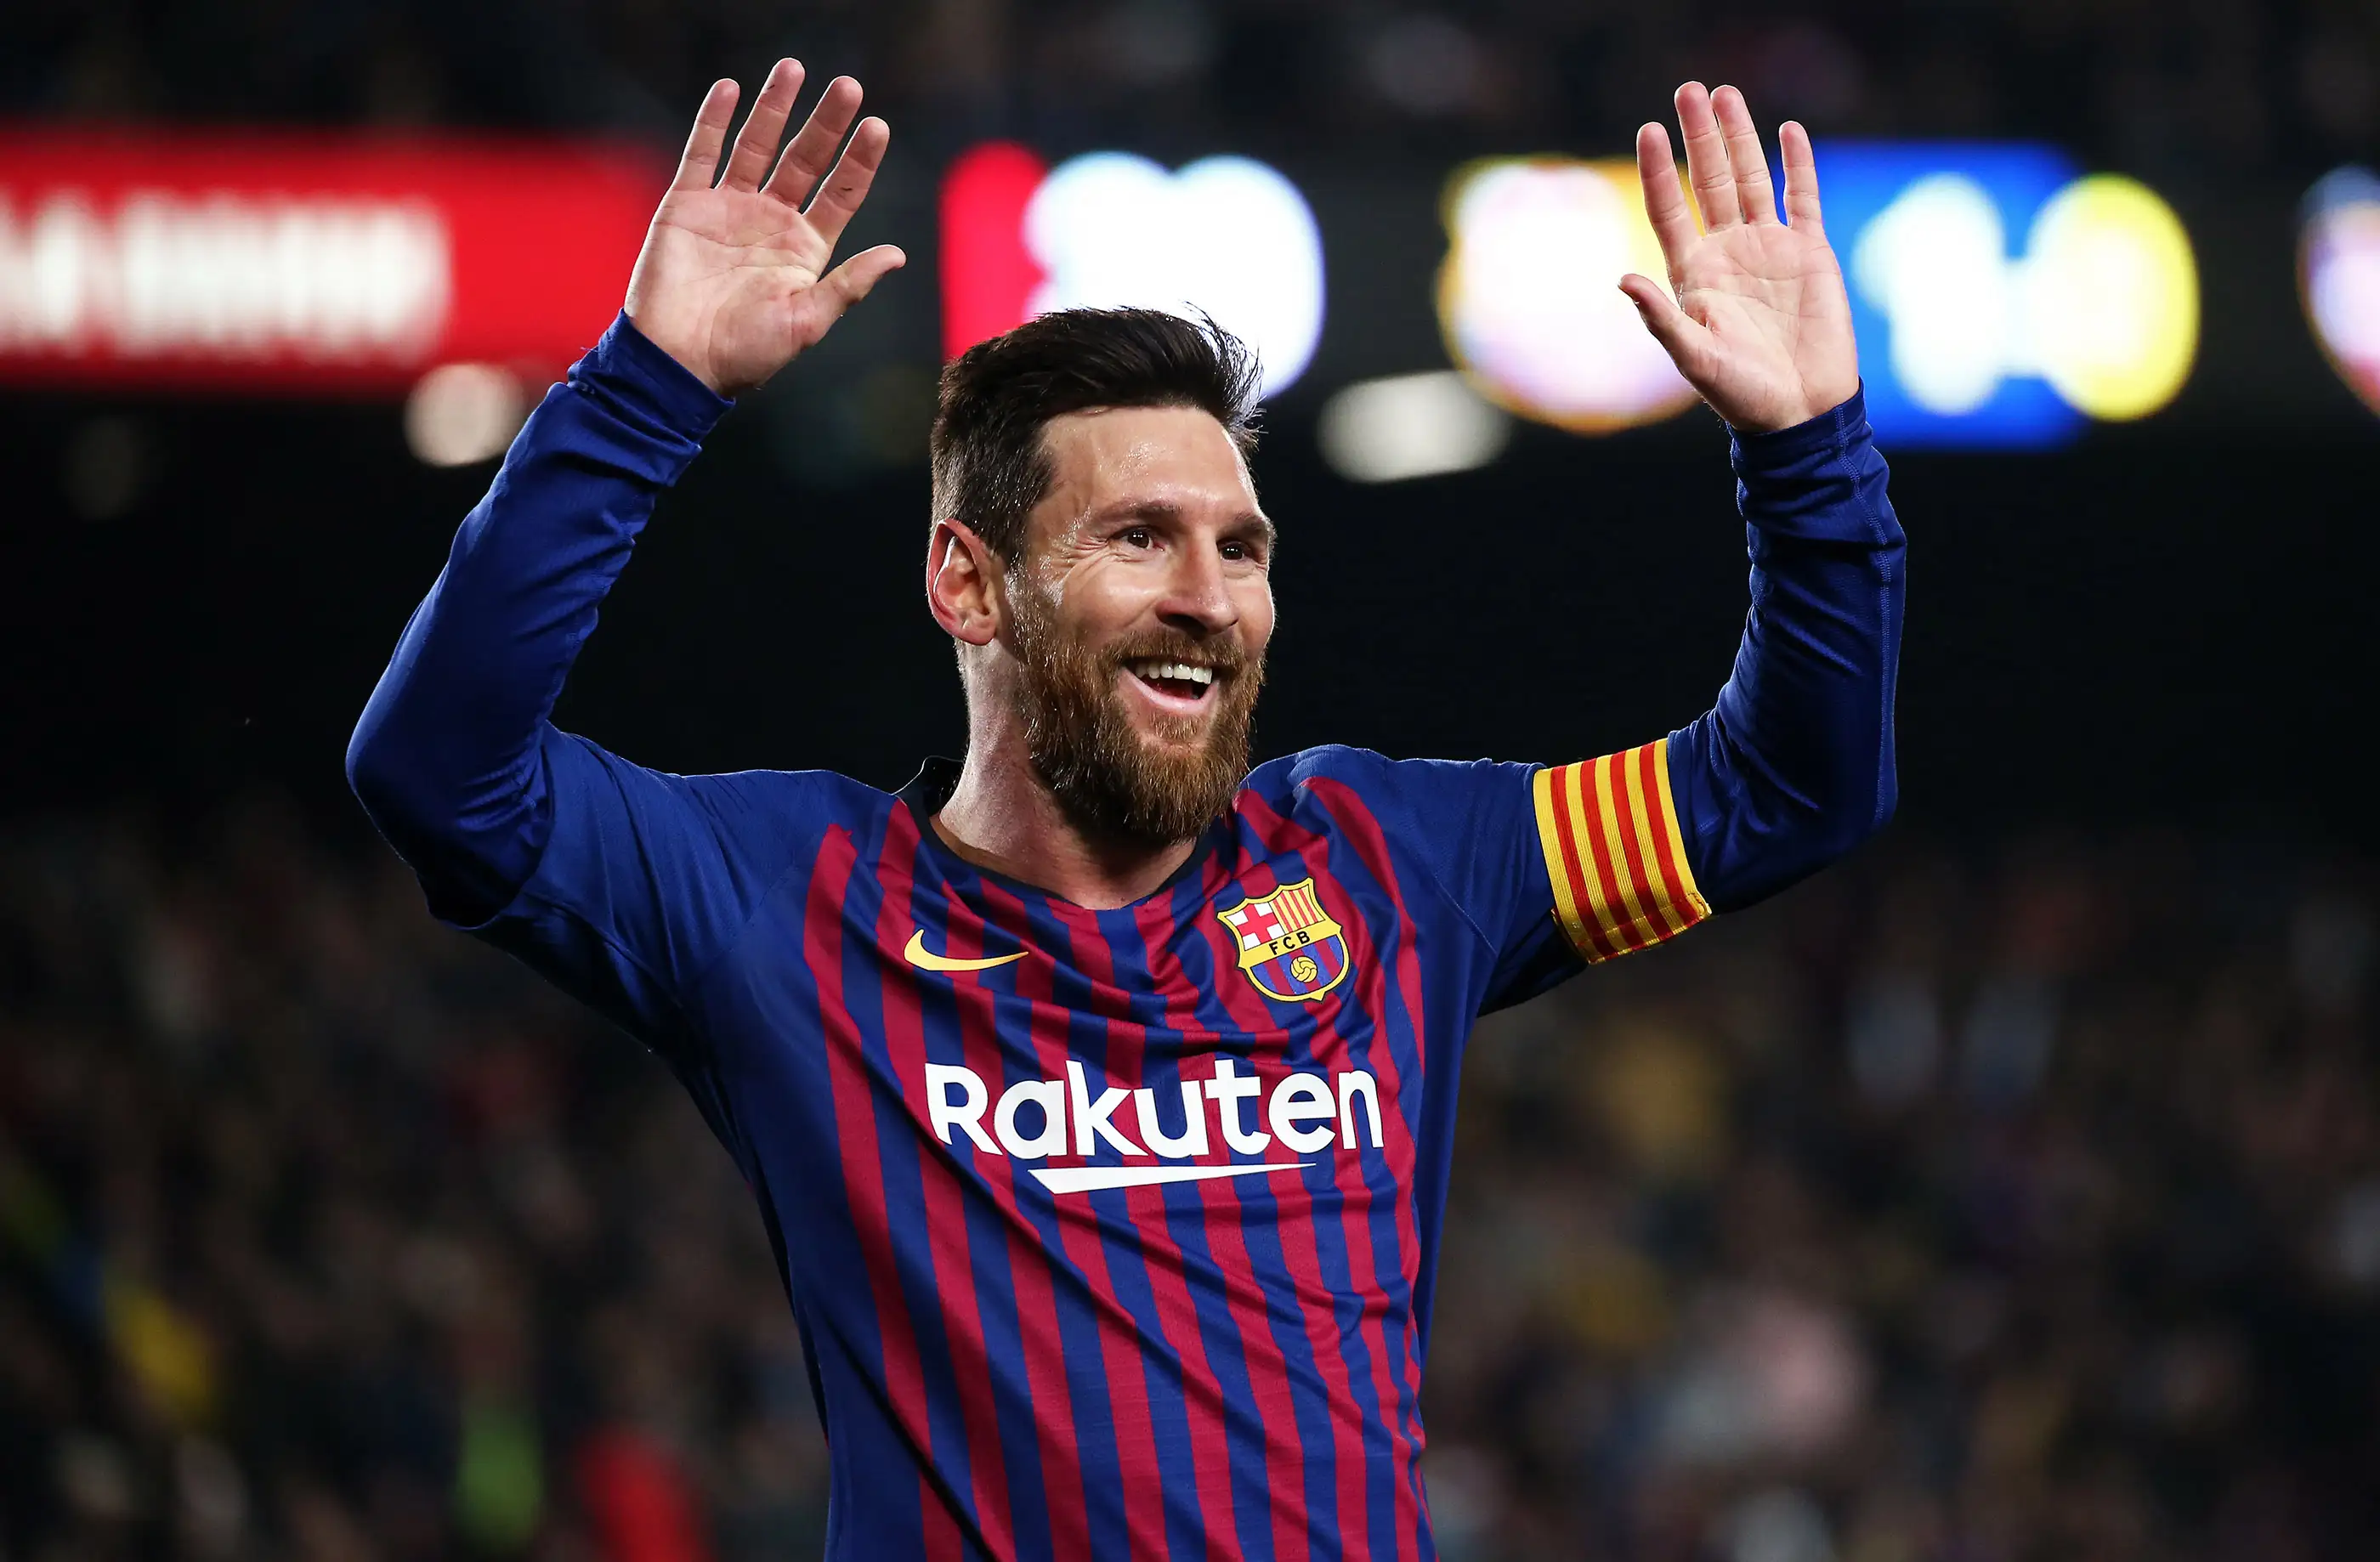 Leo Messi during the match between FC Barcelona and Levante UD, corresponding to the 1/8 final of the spanish cup, played at the Camp Nou Stadium, on 17th January 2019, in Barcelona, Spain.